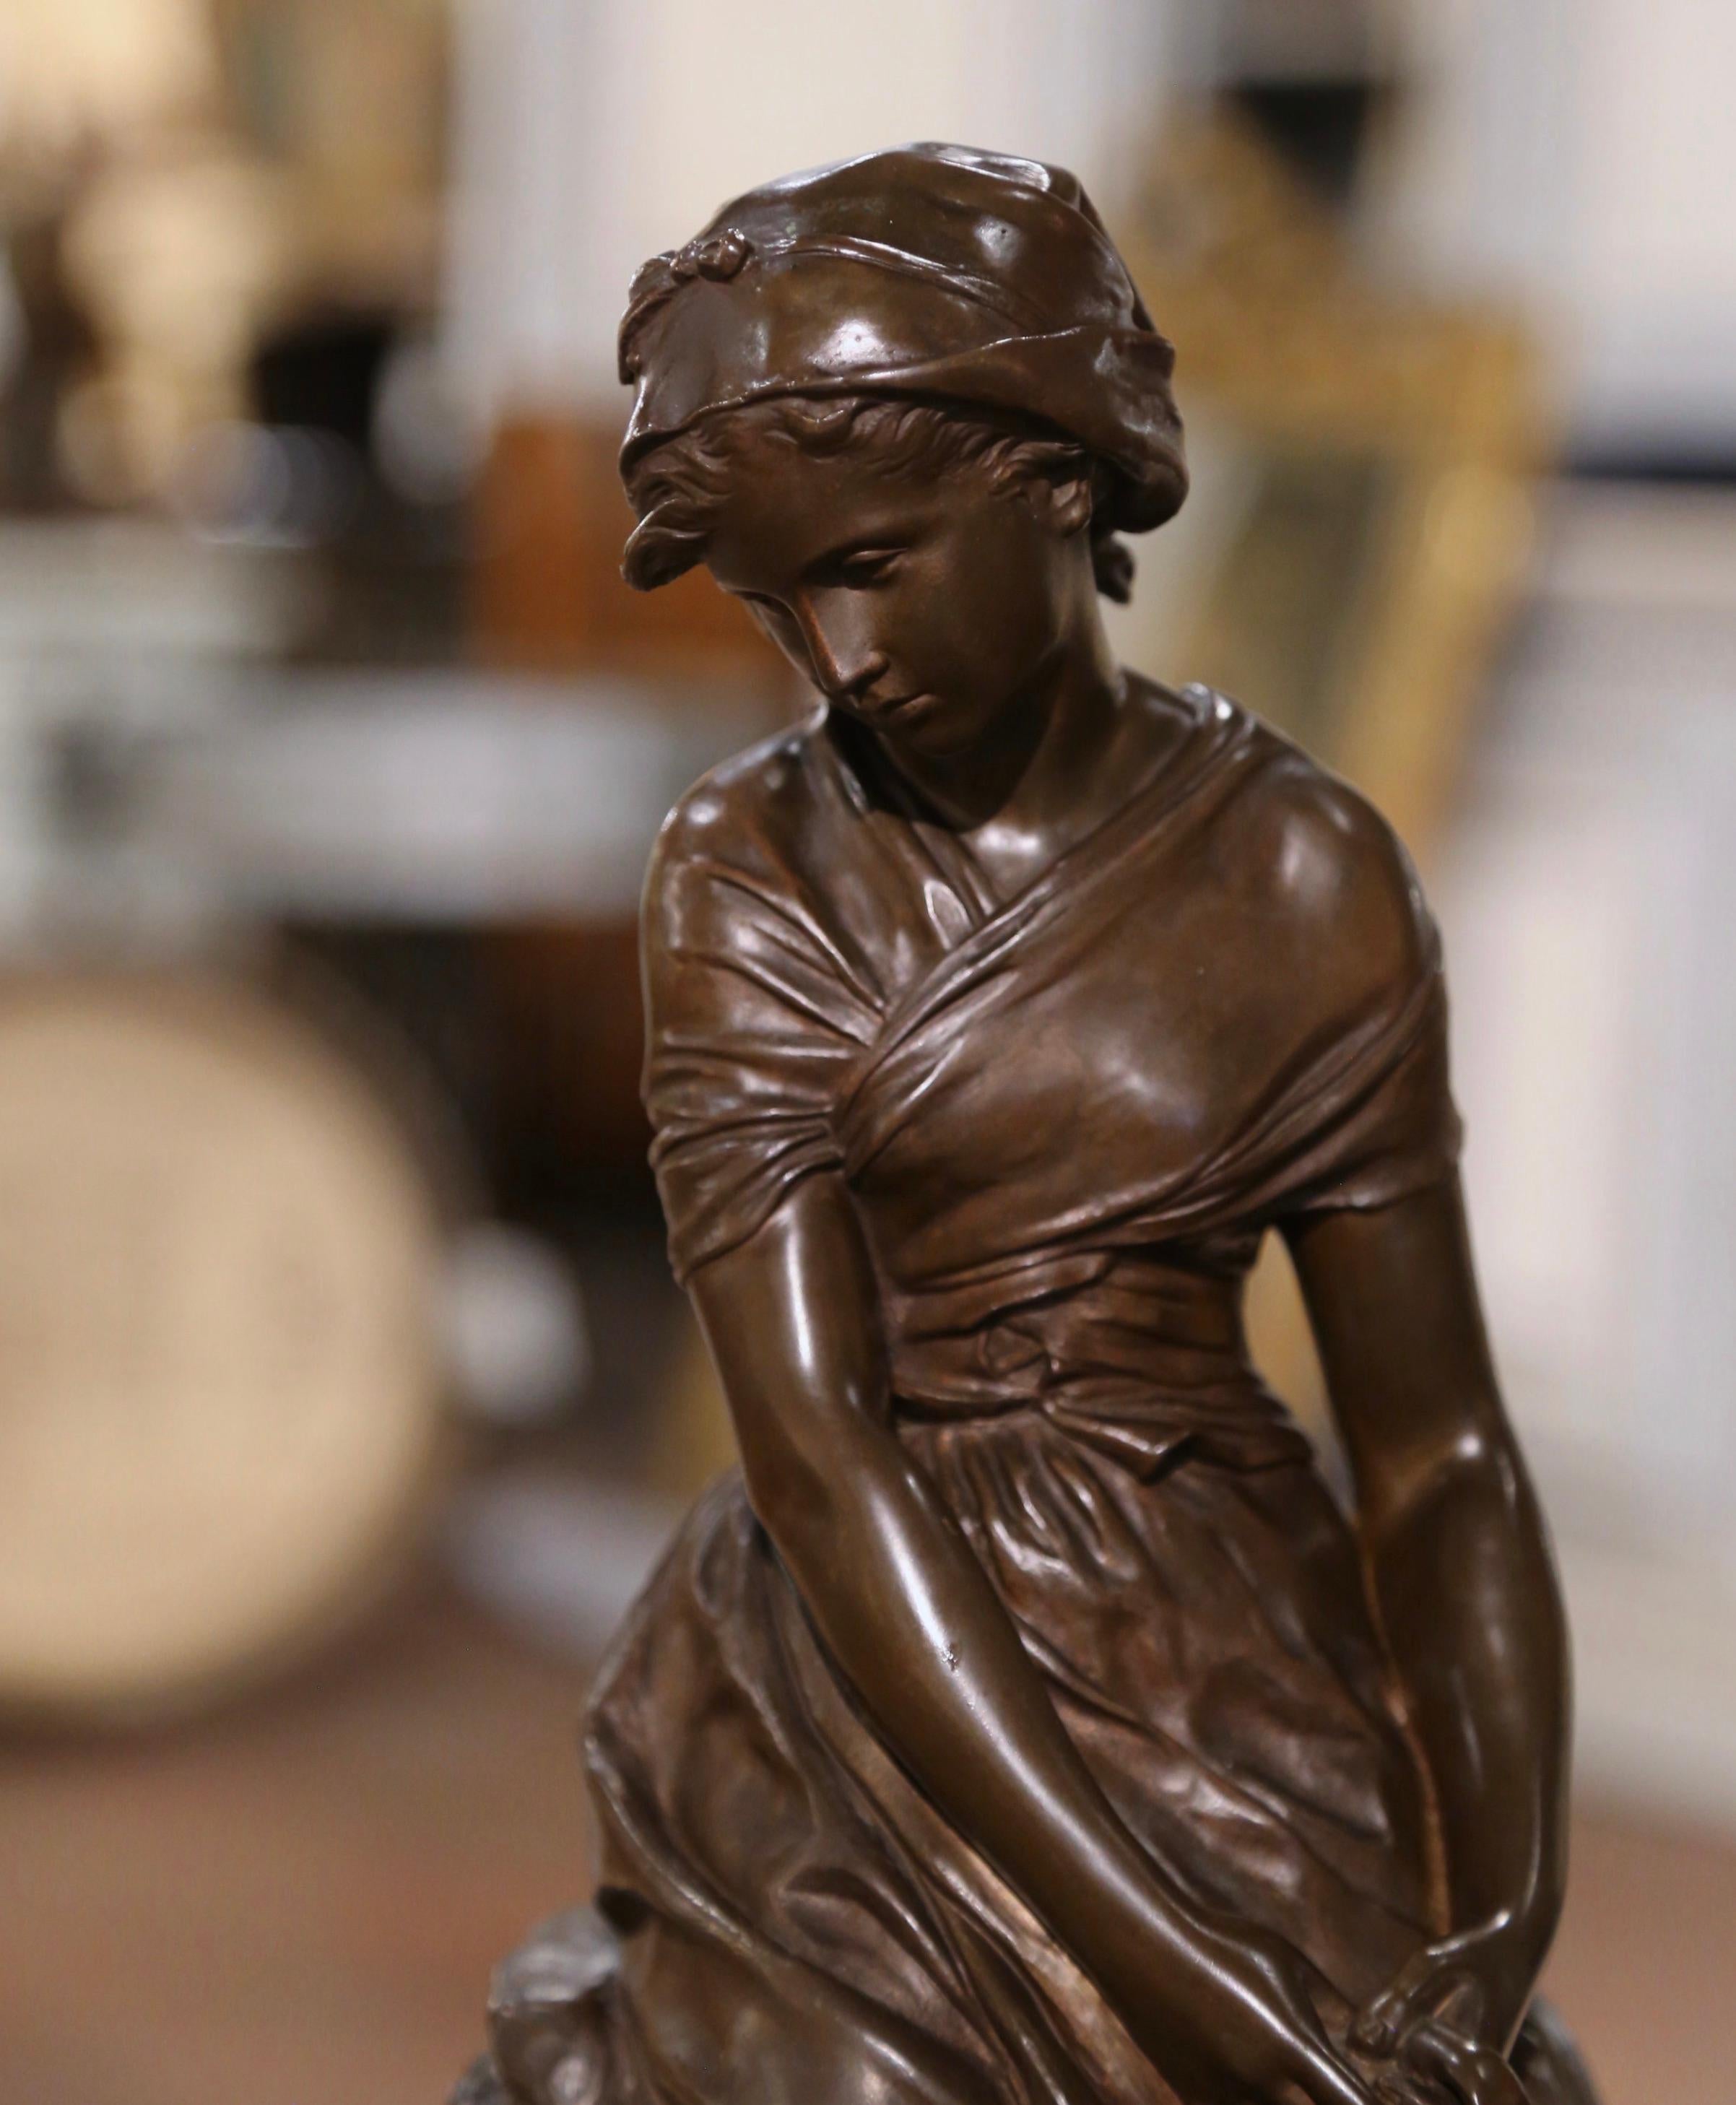  Decorate a lady's office or a library shelf with this fine antiquity. Crafted in France circa 1880, this elegant bronze sculpture titled “La Cruche Cassée” (The Broken Pitcher), features a young beauty sited on a trunk form bench, and looking down